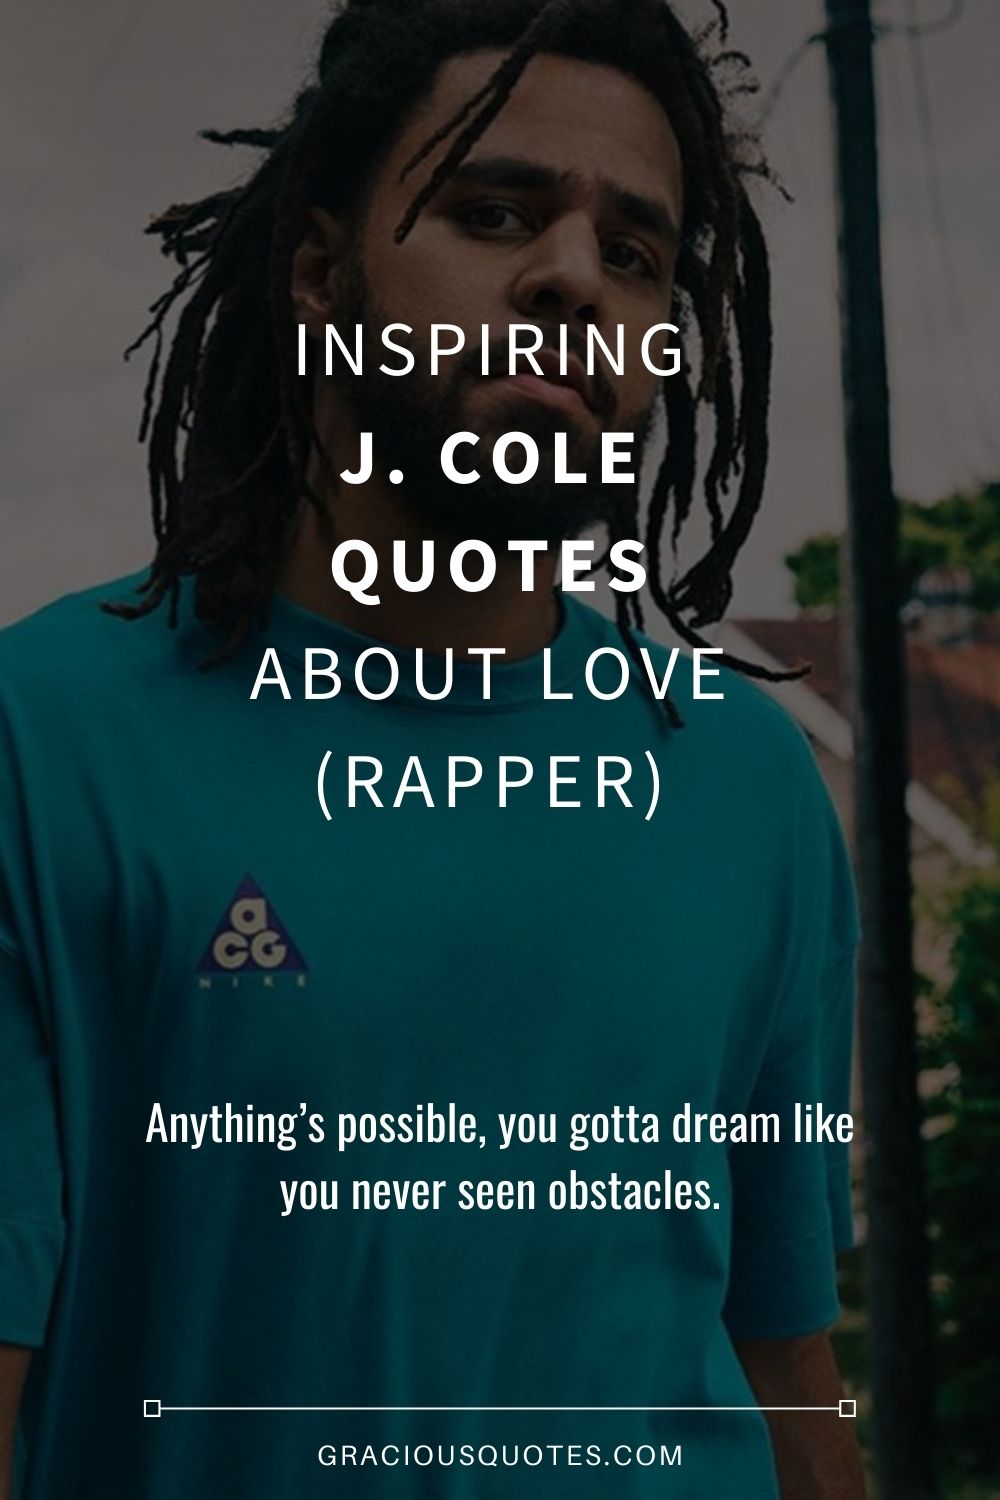 Inspiring J. Cole Quotes About Love RAPPER Gracious Quotes 